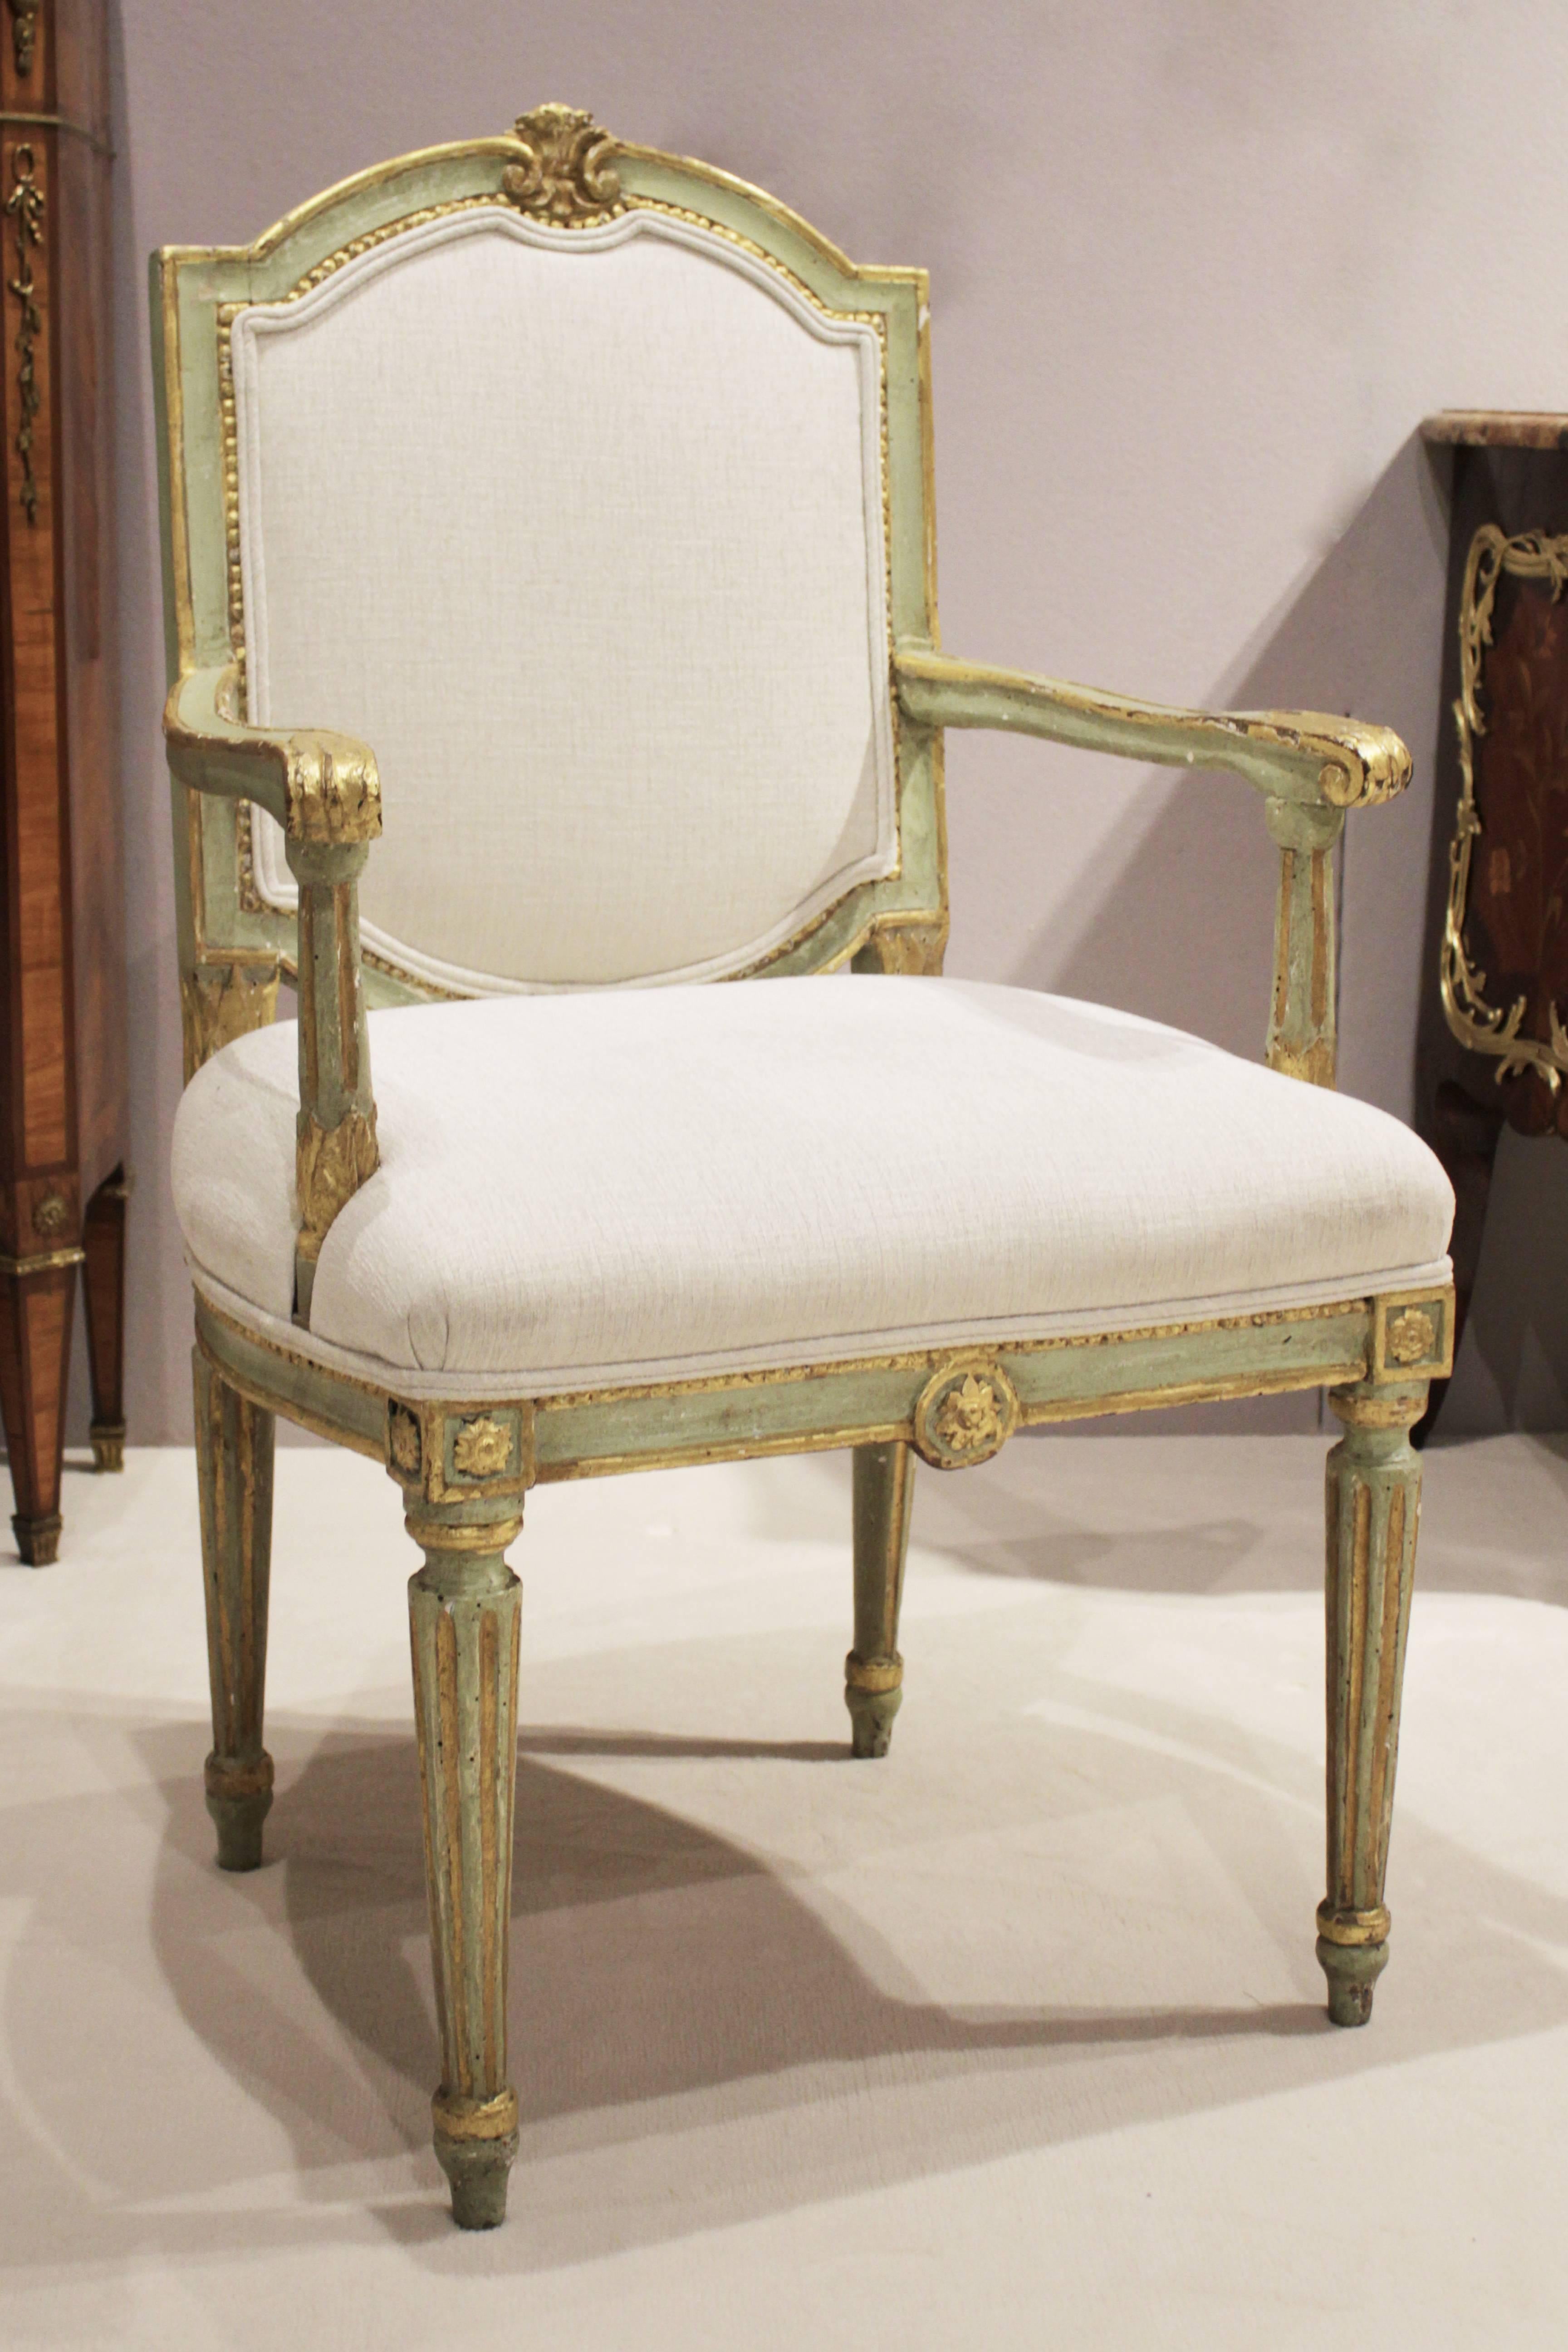 Pair of Venetian lacquer povera armchairs
green-painted and parcel-gilt
Italy, 18th century
Measures: H 39in. x W 22in. x D 17in.